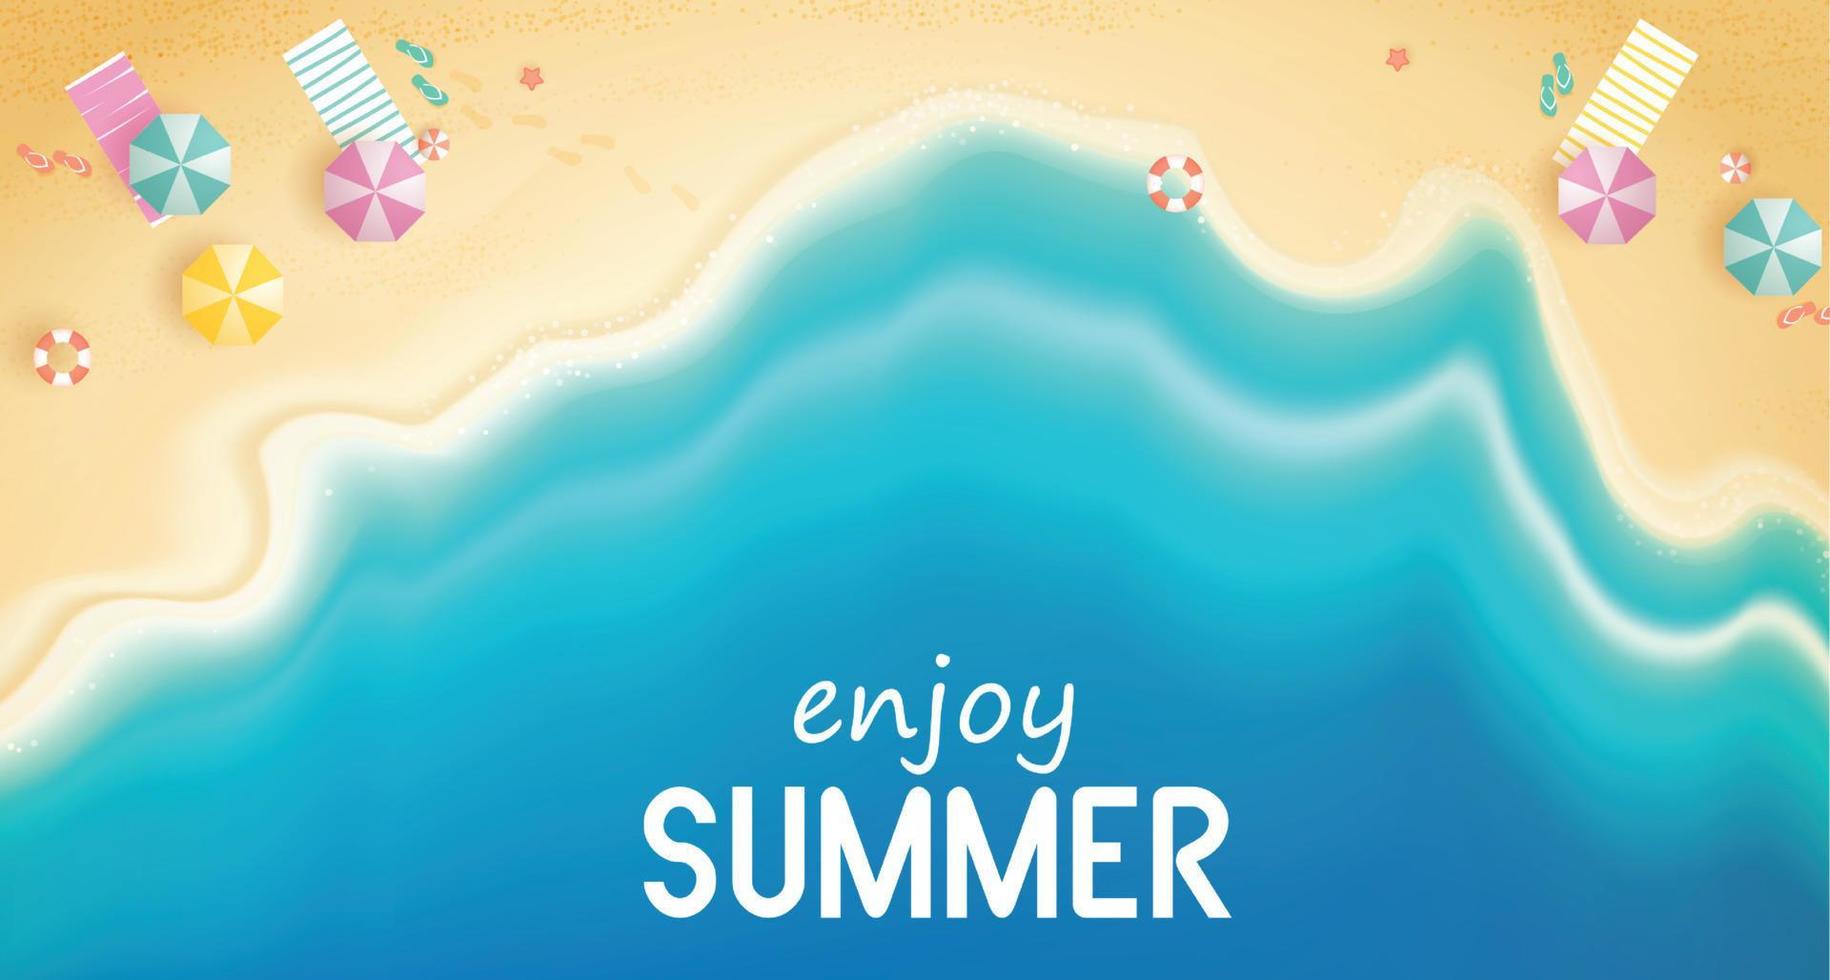 Top view summer with water play equipment placed on the beach. beach background with swim ring, sandals, umbrellas, balls, starfish and sea. vector illustration.